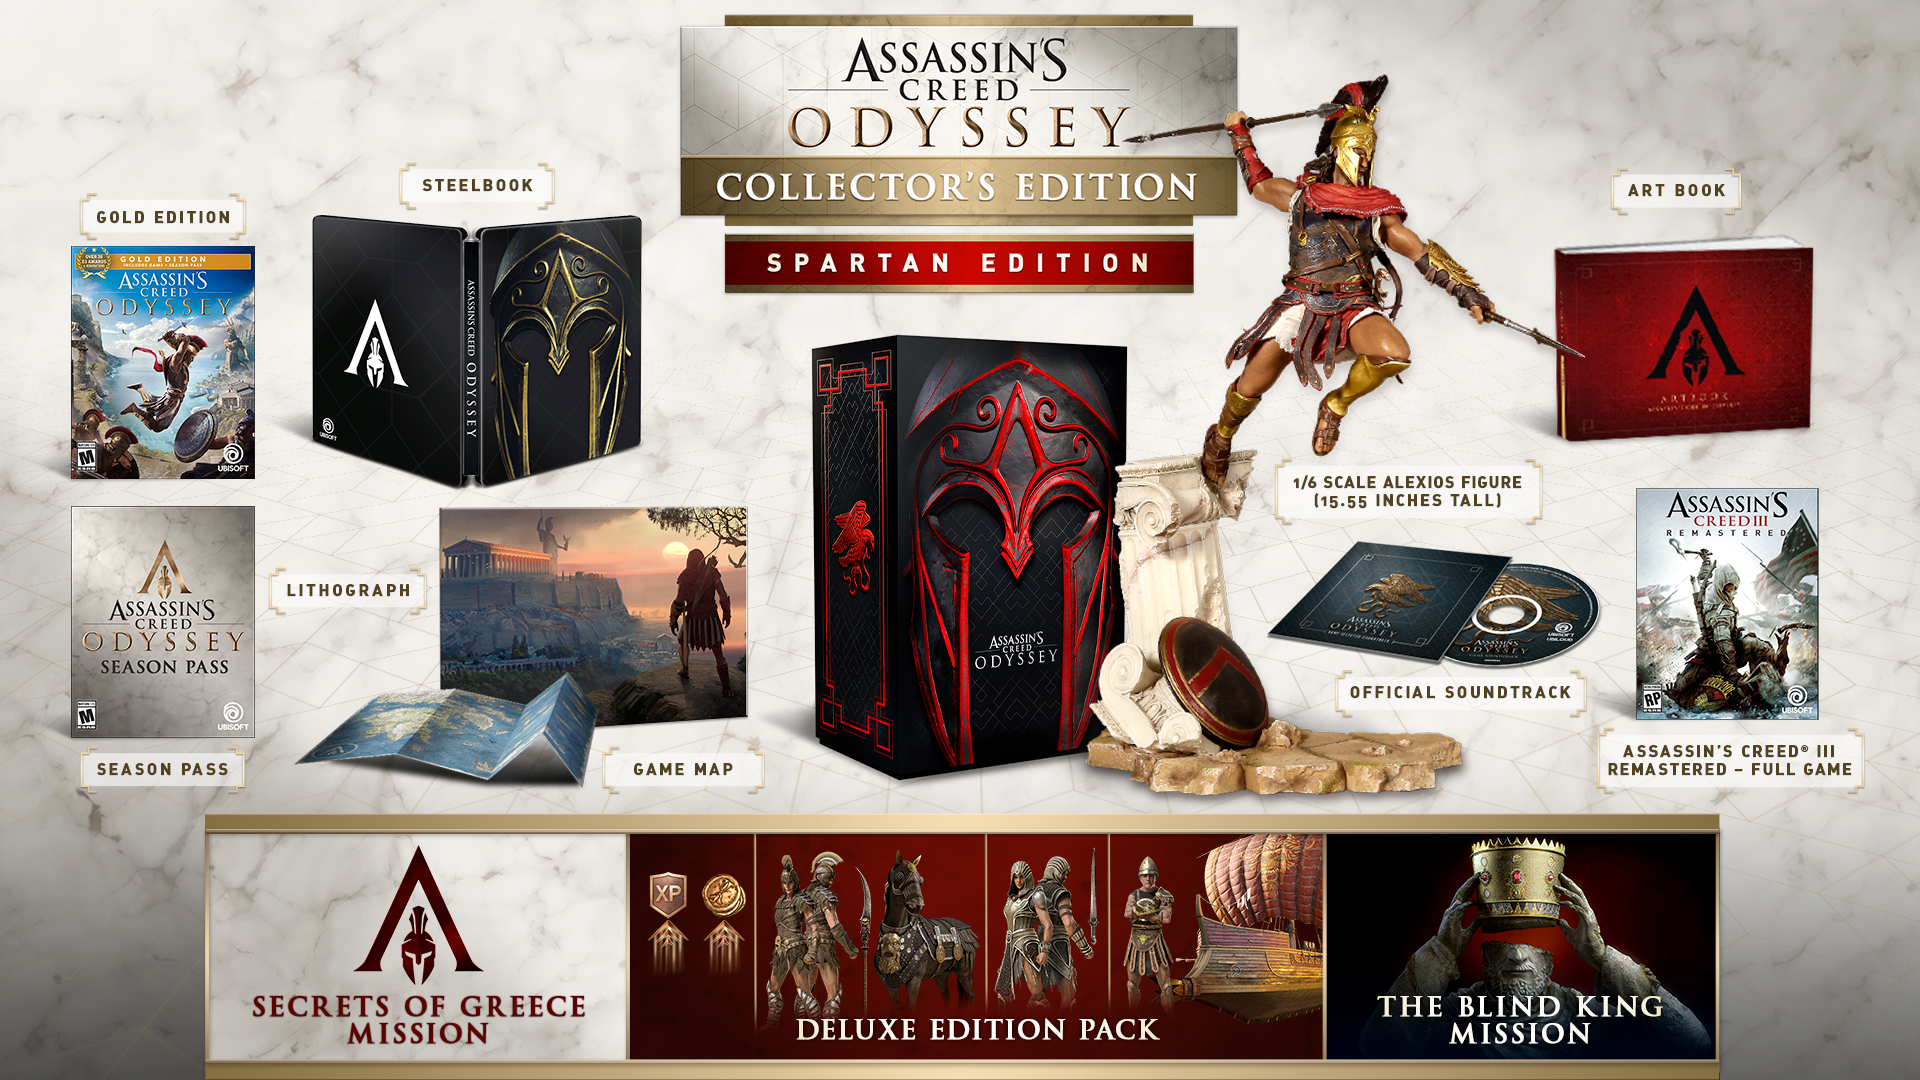 Spartan Collector's Edition and Pantheon Edition - Assassin's Creed Odyssey  - PlayStationTrophies.org